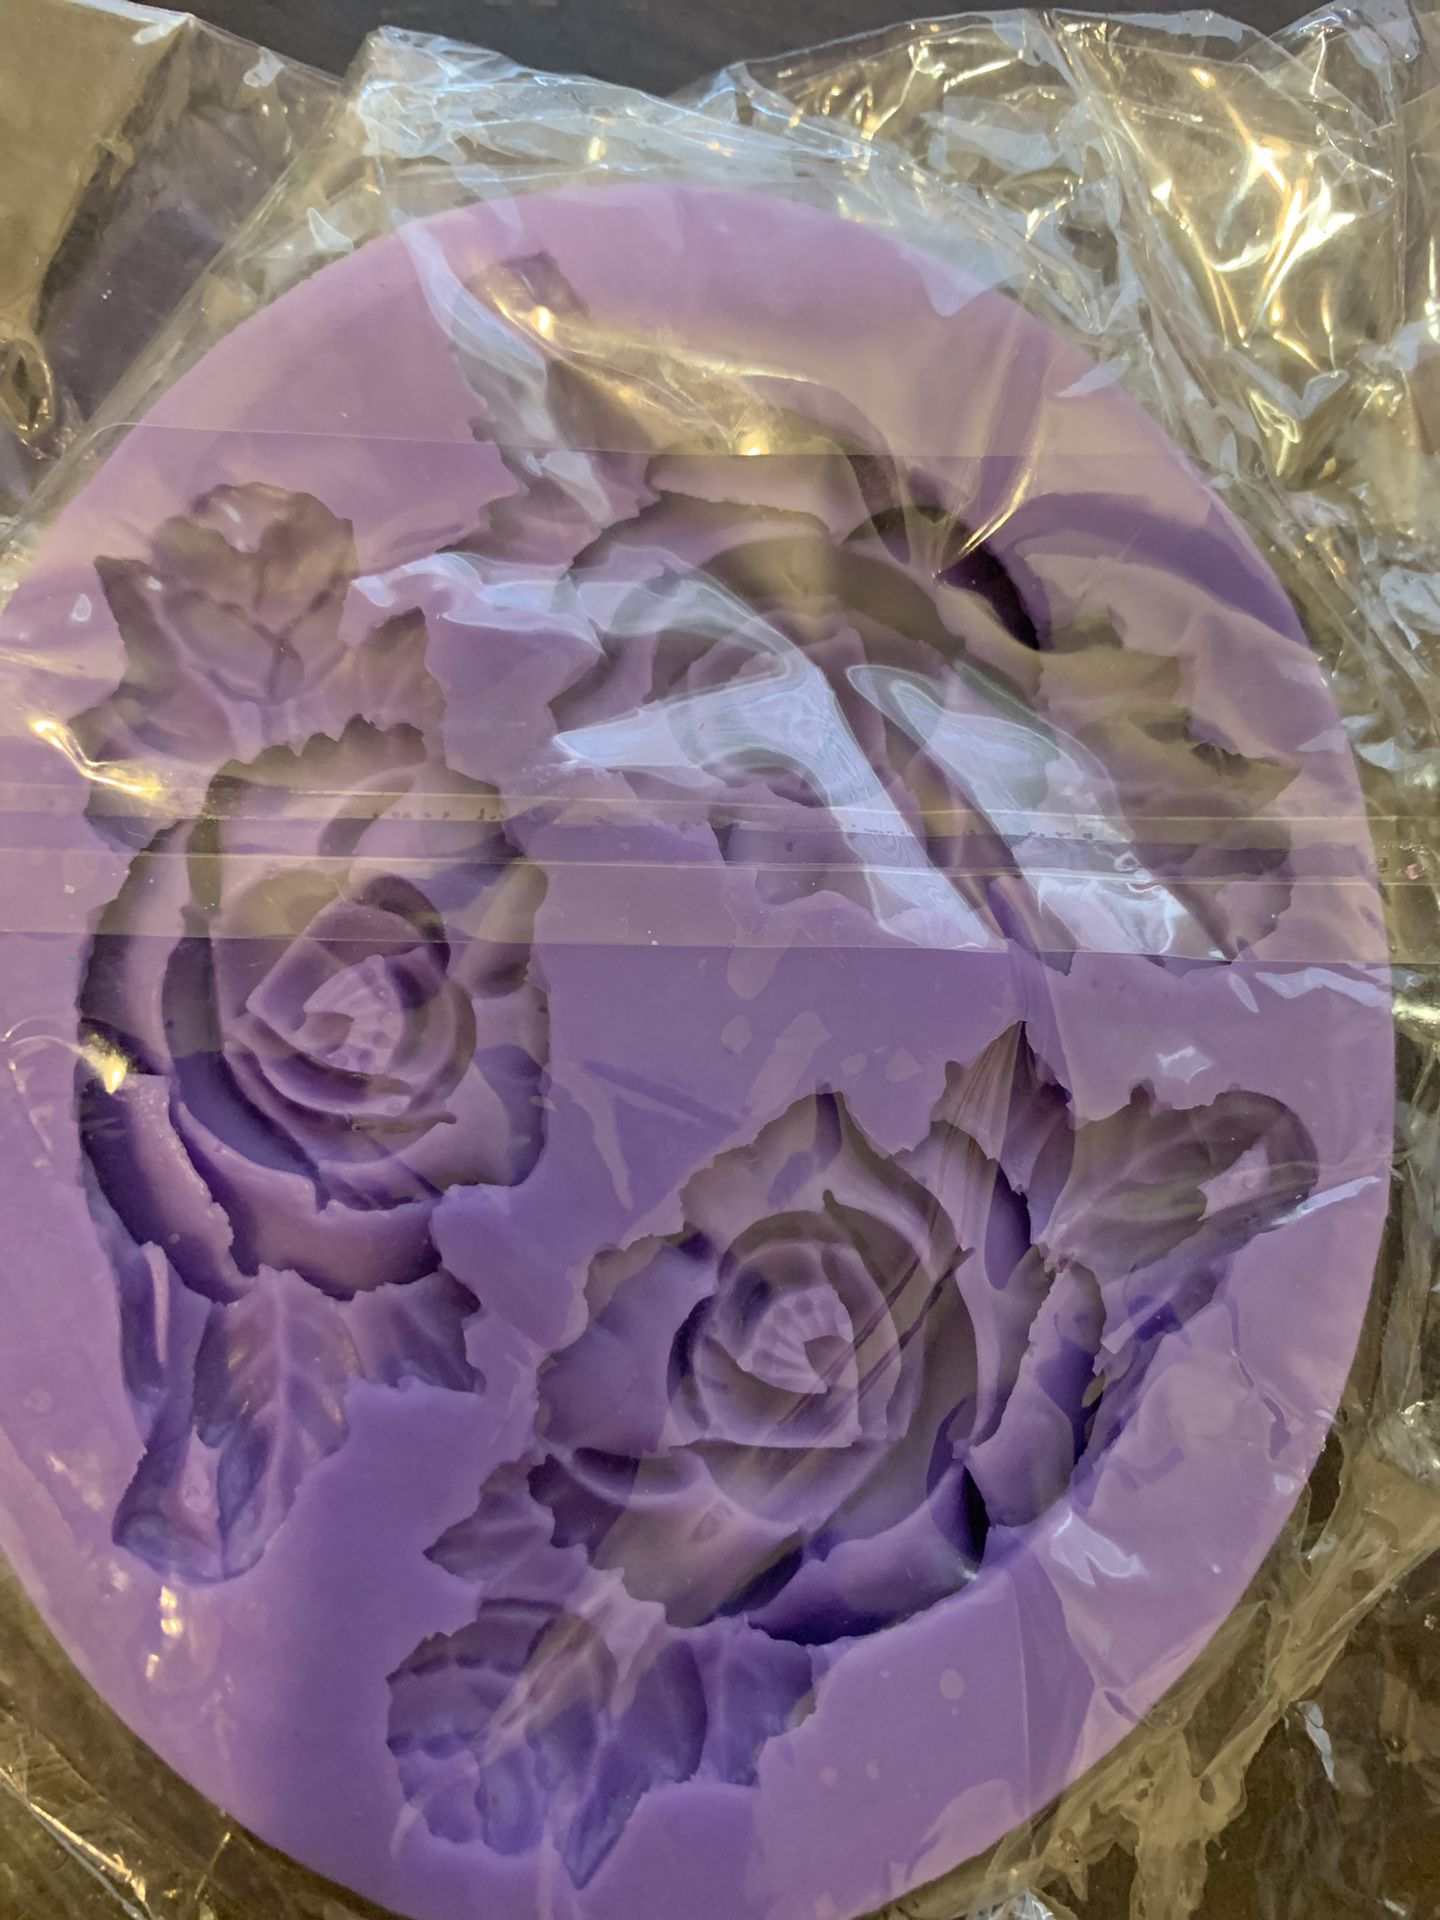 3D Rose Flowers Shaped Silicon Fondant/Chocolate Mold Fondant and Gum Paste Silicone Mold Baroque Rose